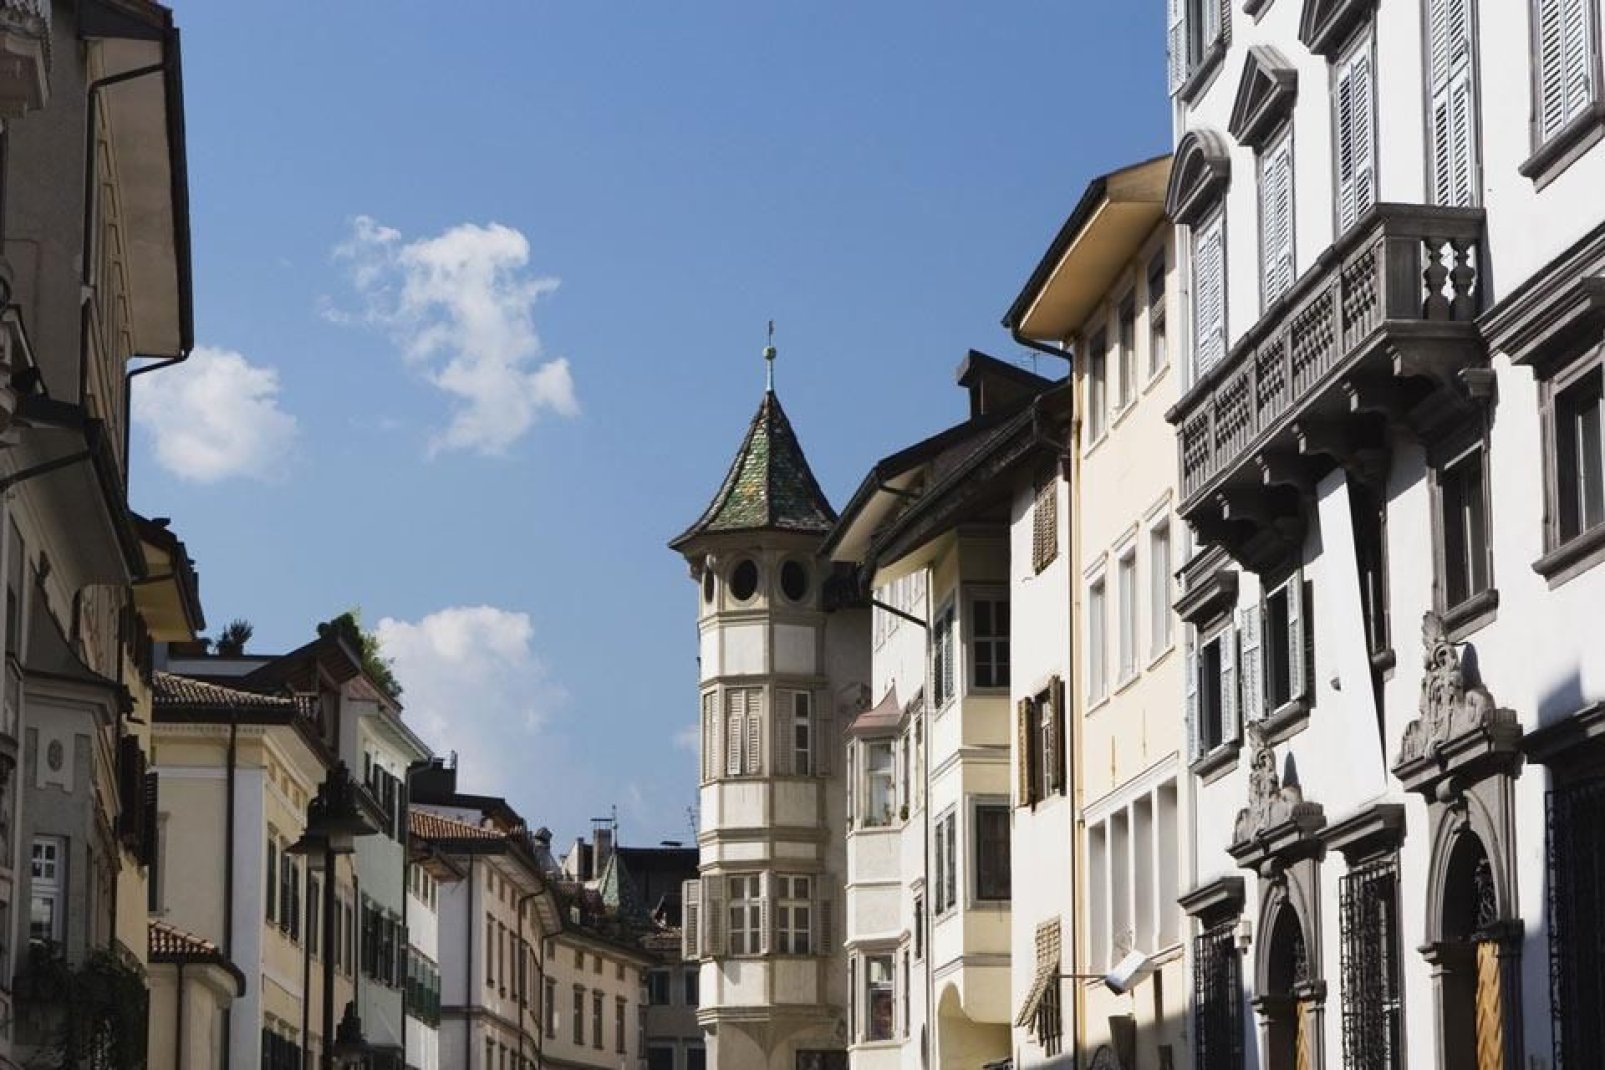 The streets of the city centre, surrounded by typical Trento-style architecture, are perfect for a stroll.